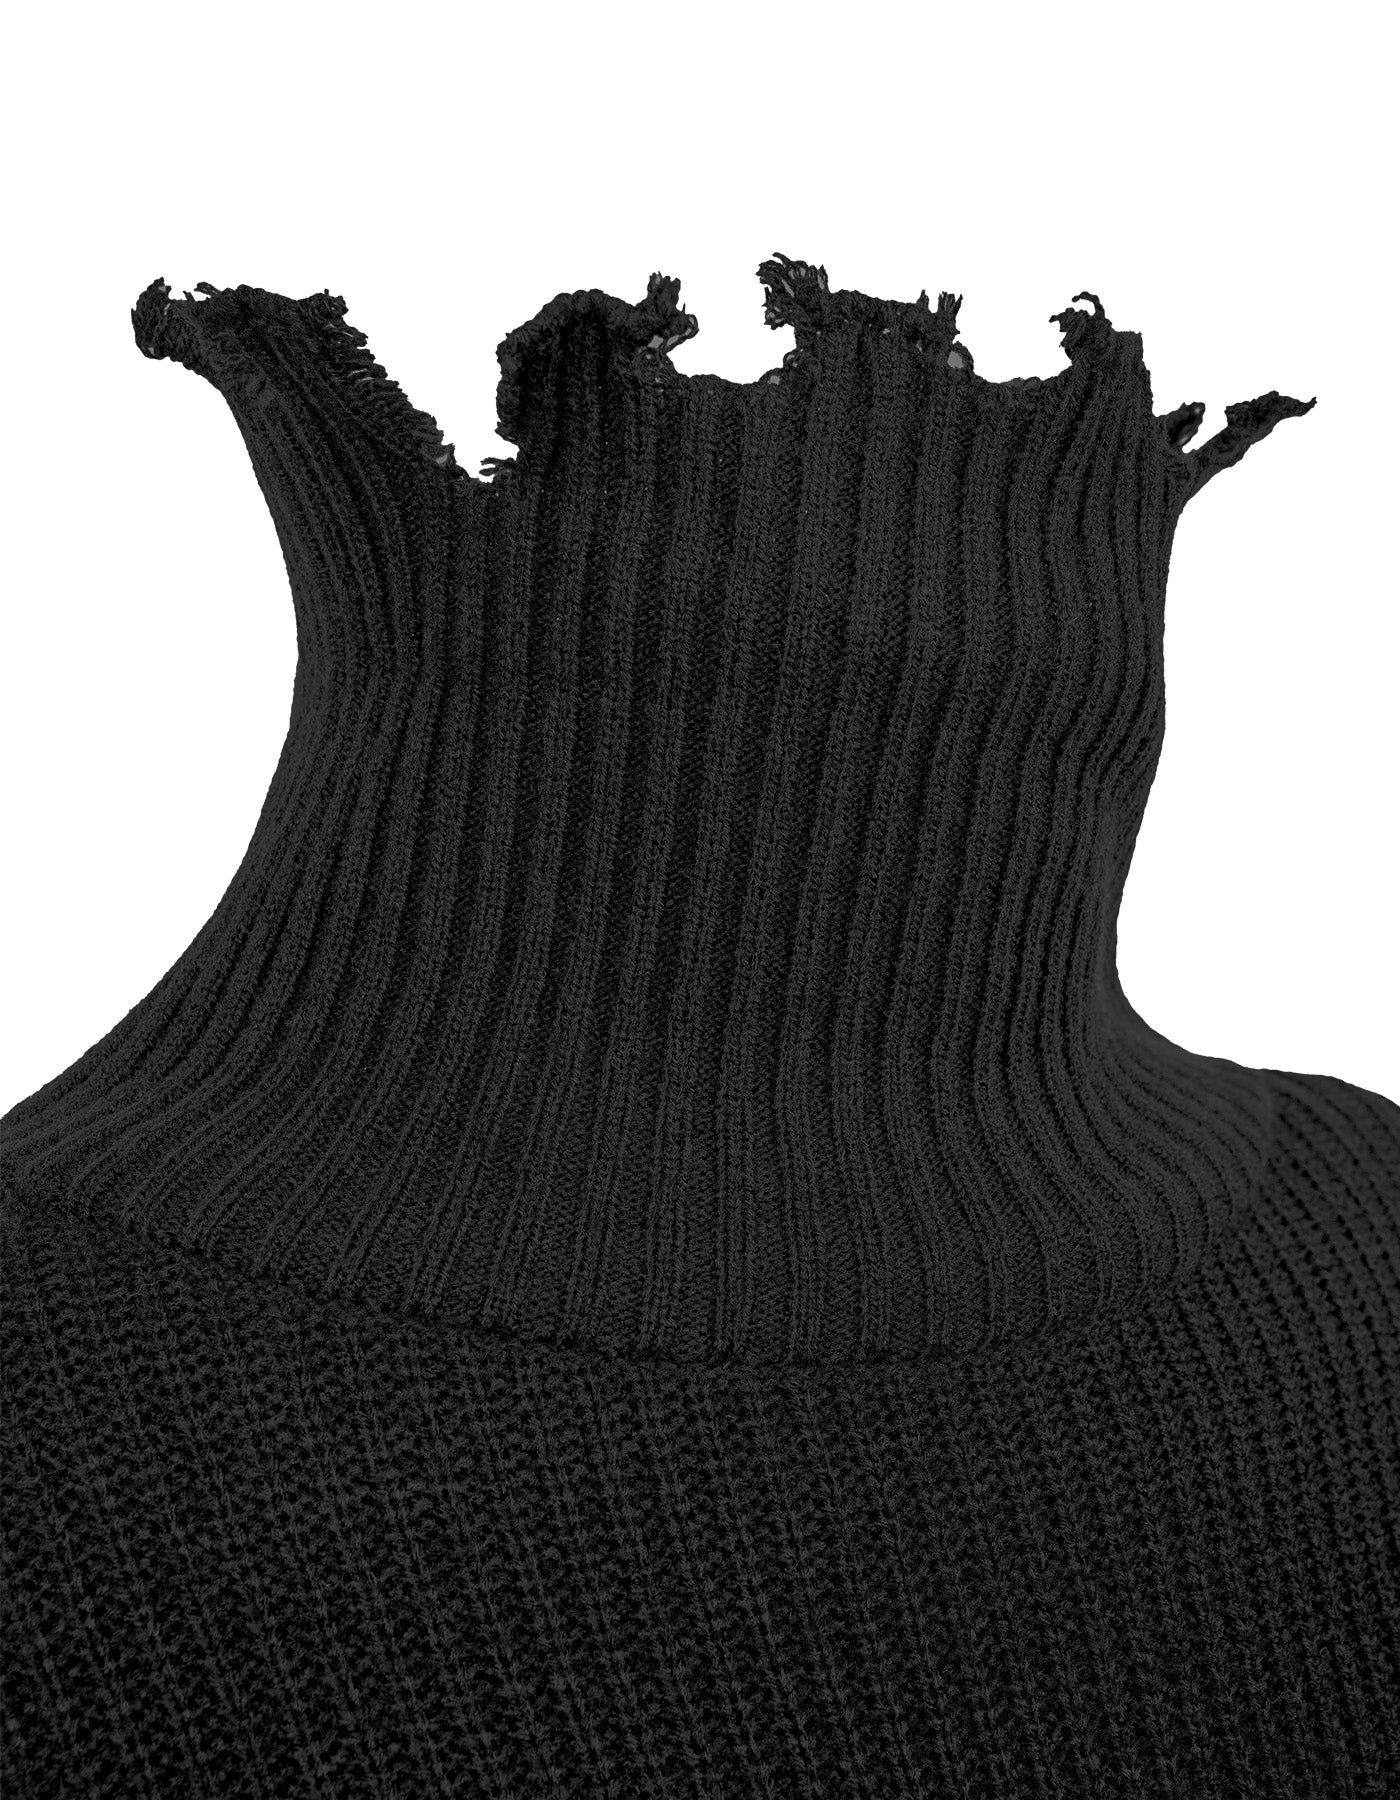 Deconstructing the Sea-Diver's Insulated Headgear Sweater